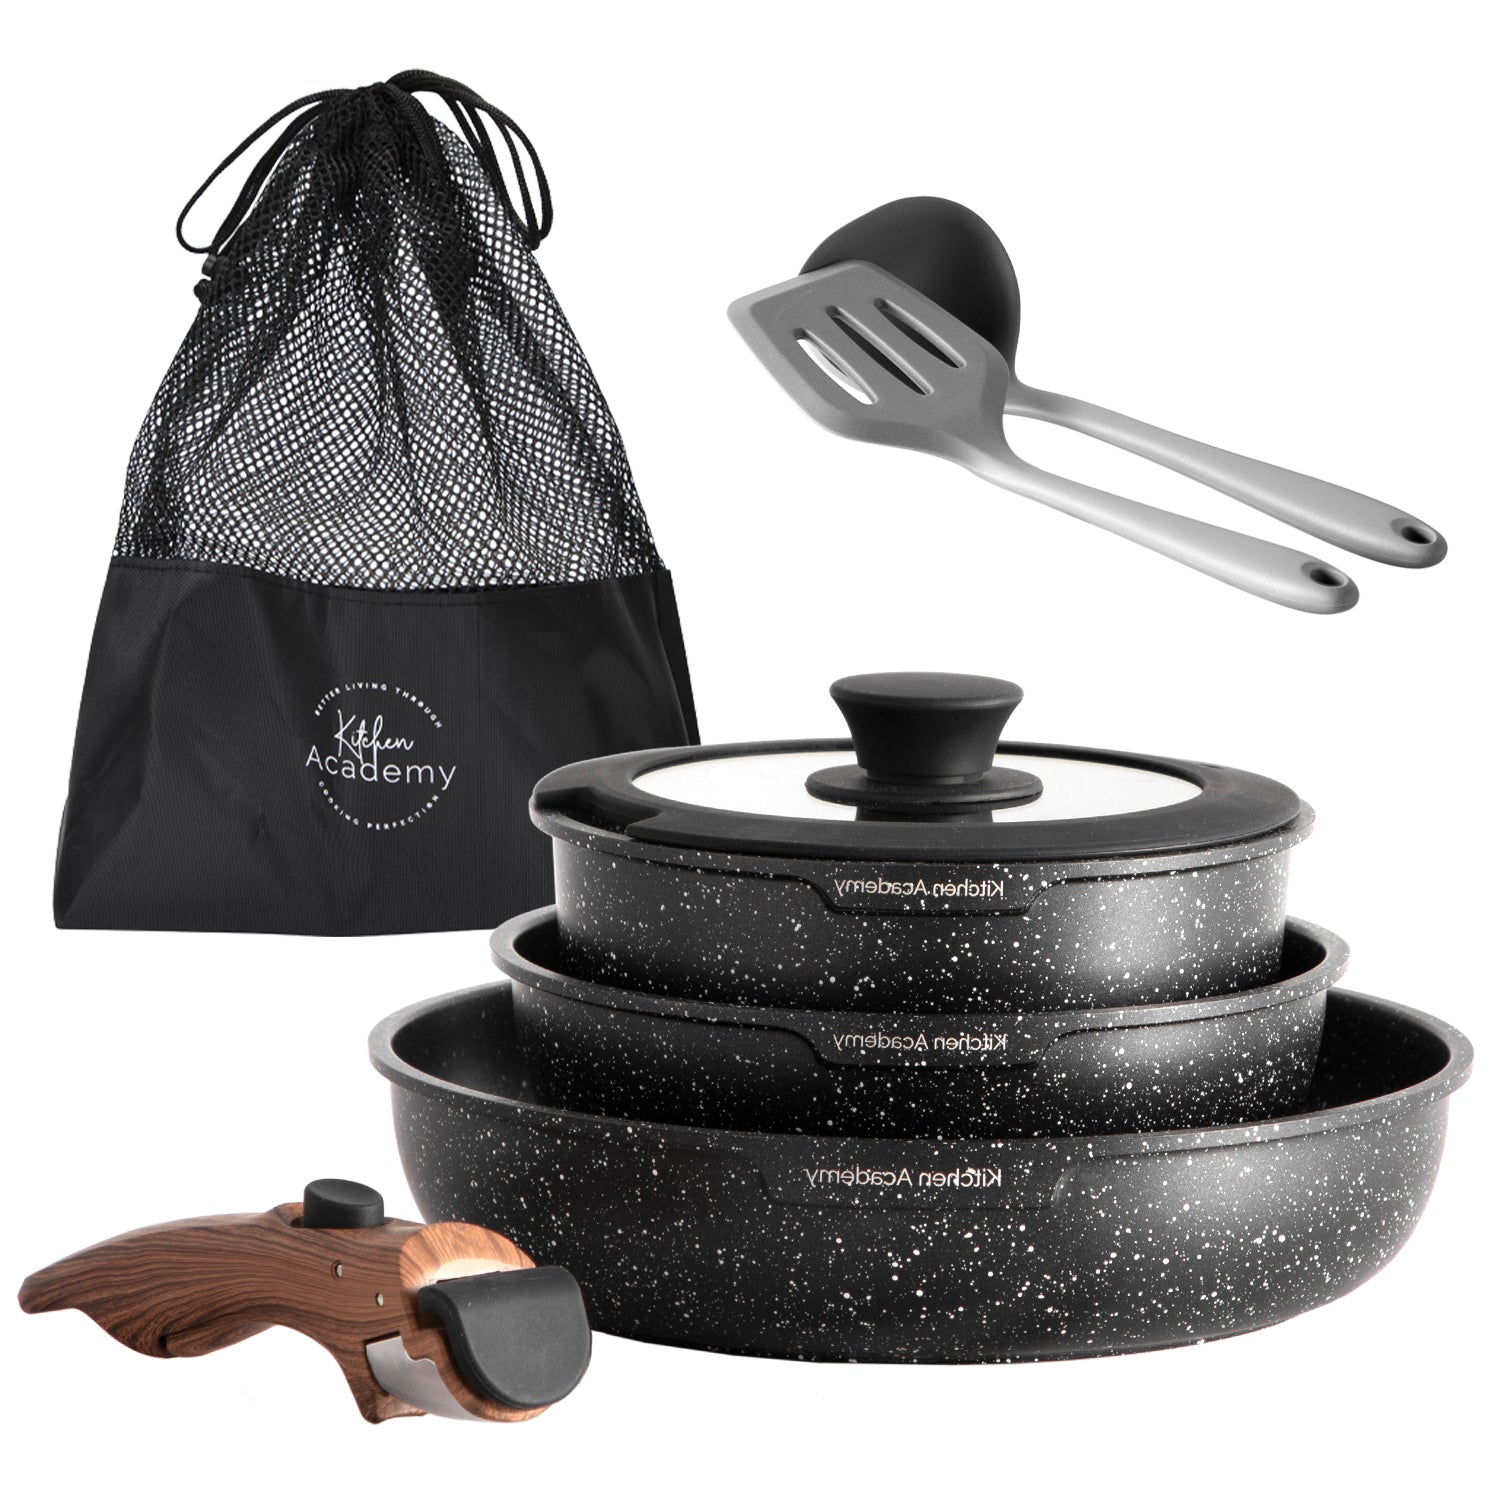 Kitchen Academy Granite 8 PCs Non Stick Cookware Gift Set with Removable Handle